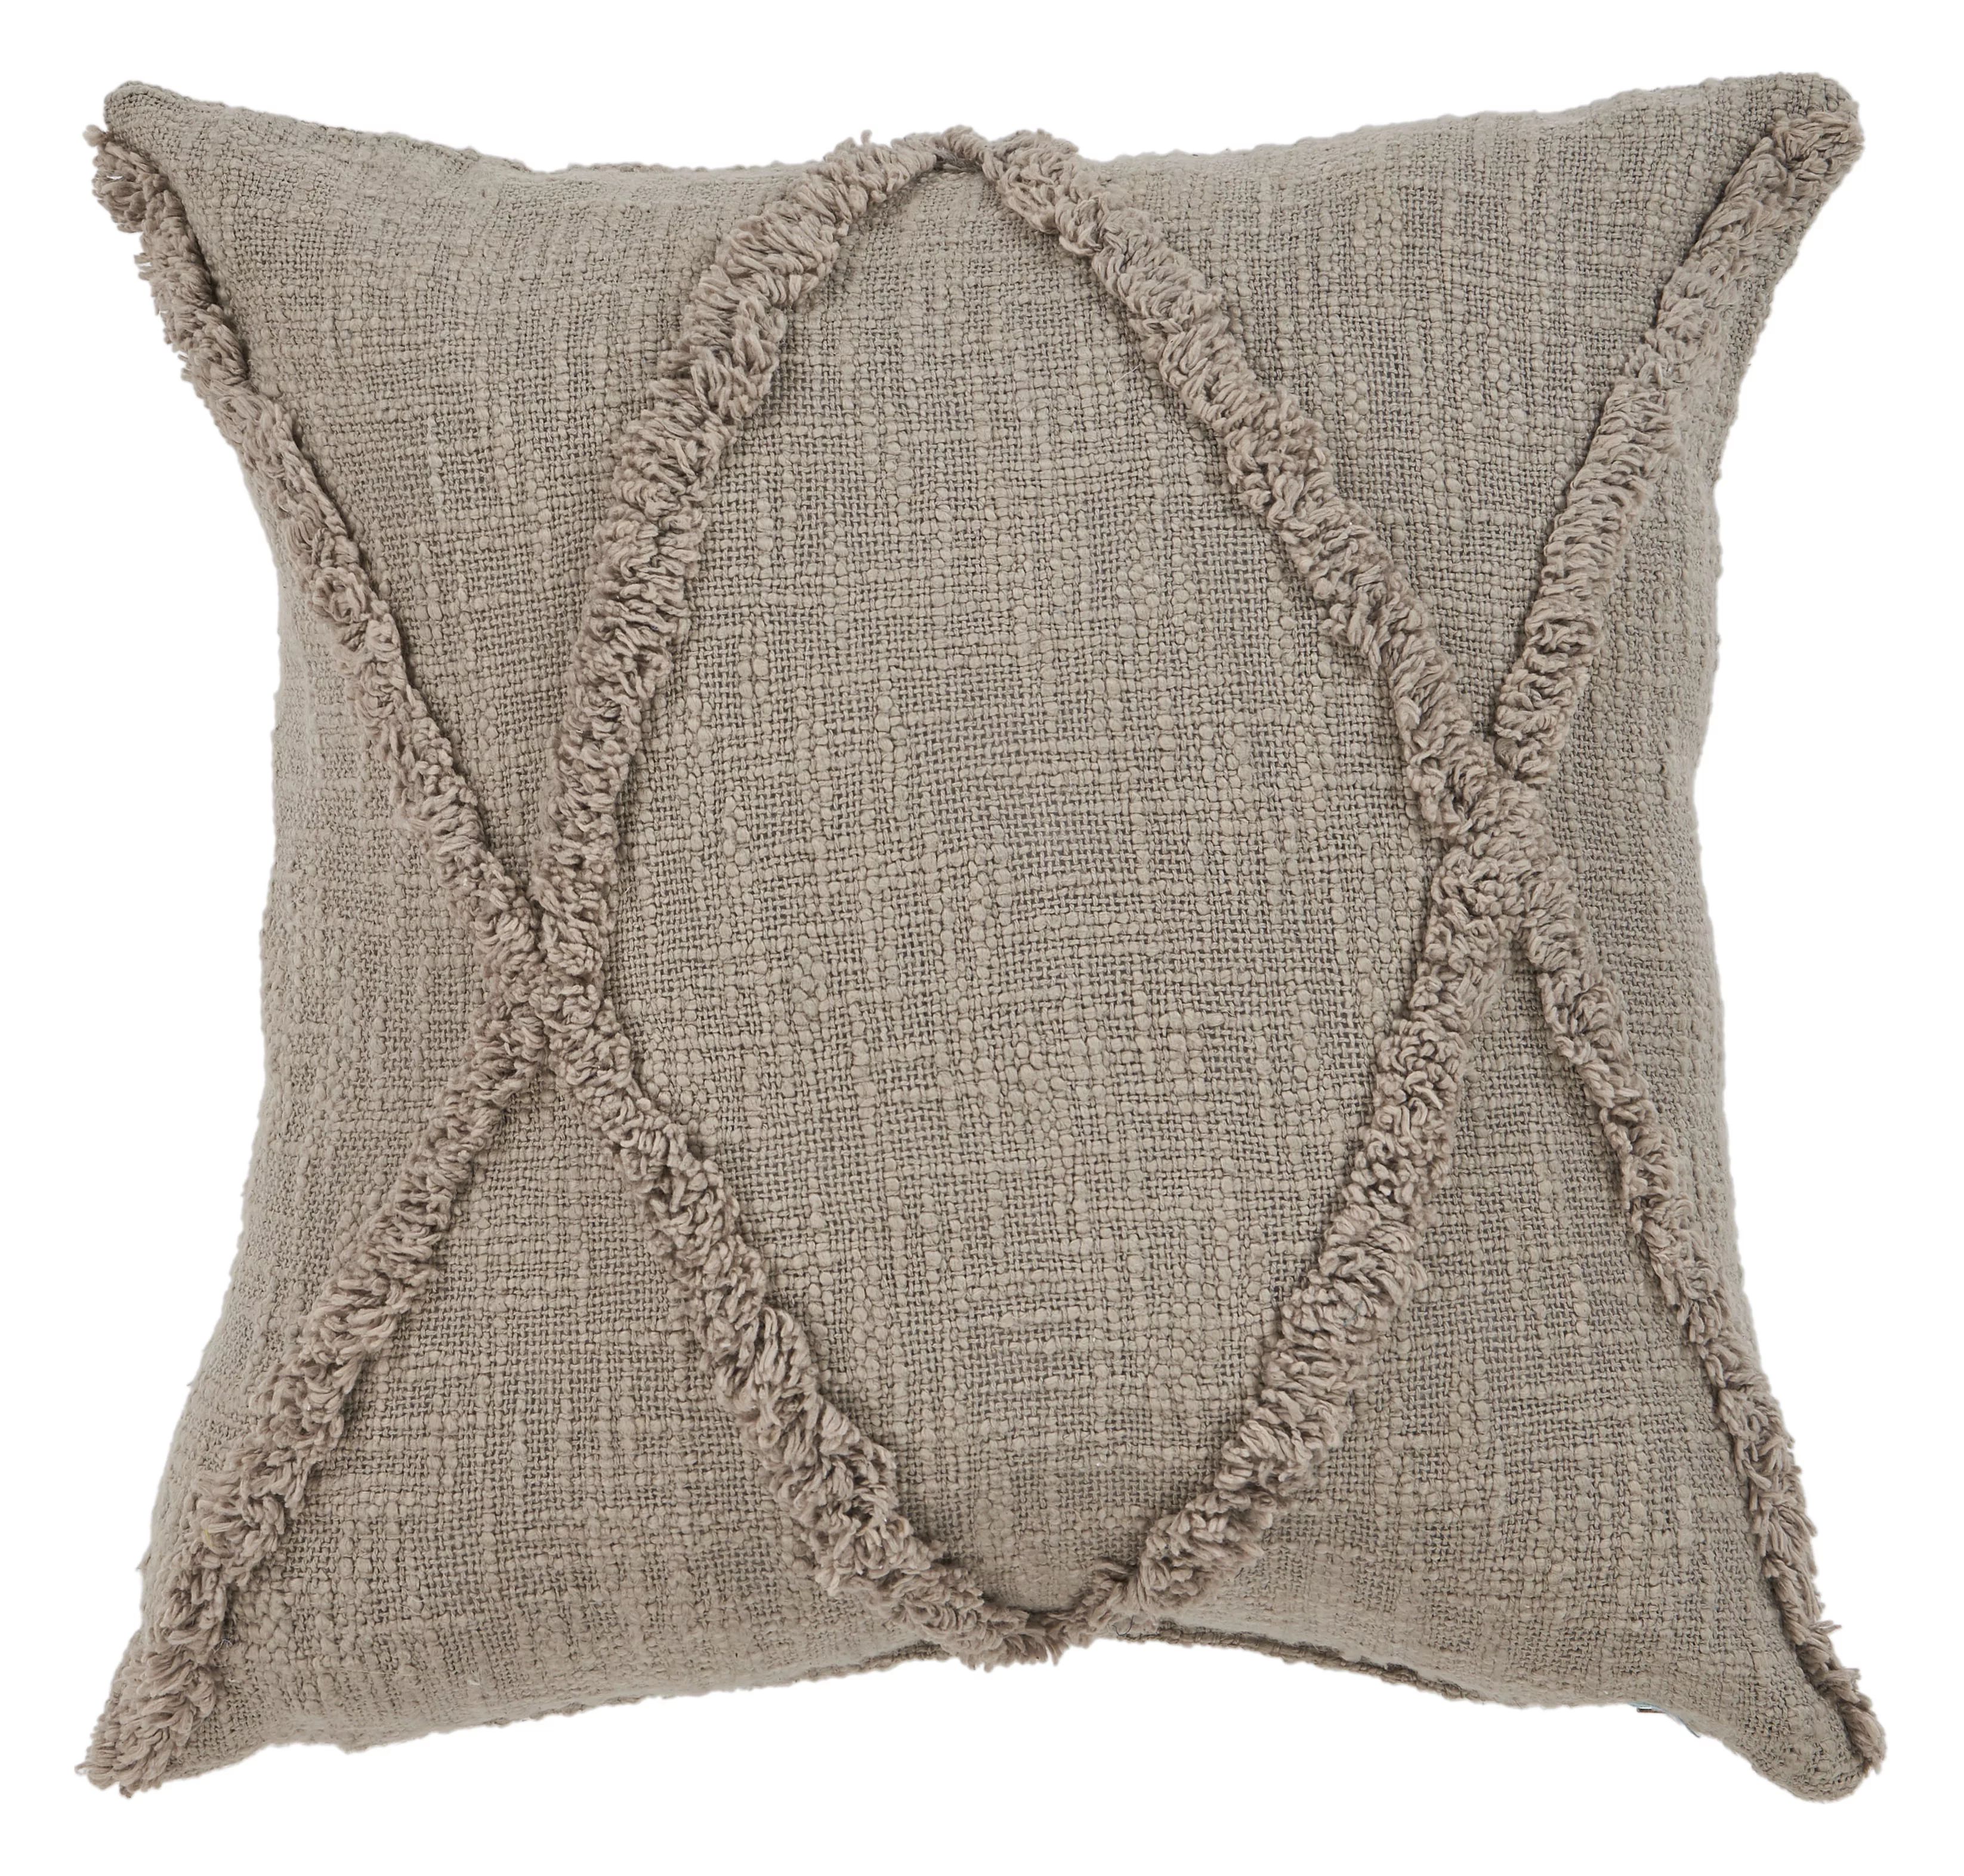 LR Home Solid Diamond Tufted Cotton Square Throw Pillow, Taupe Brown, 20", Count per Pack 1 | Walmart (US)